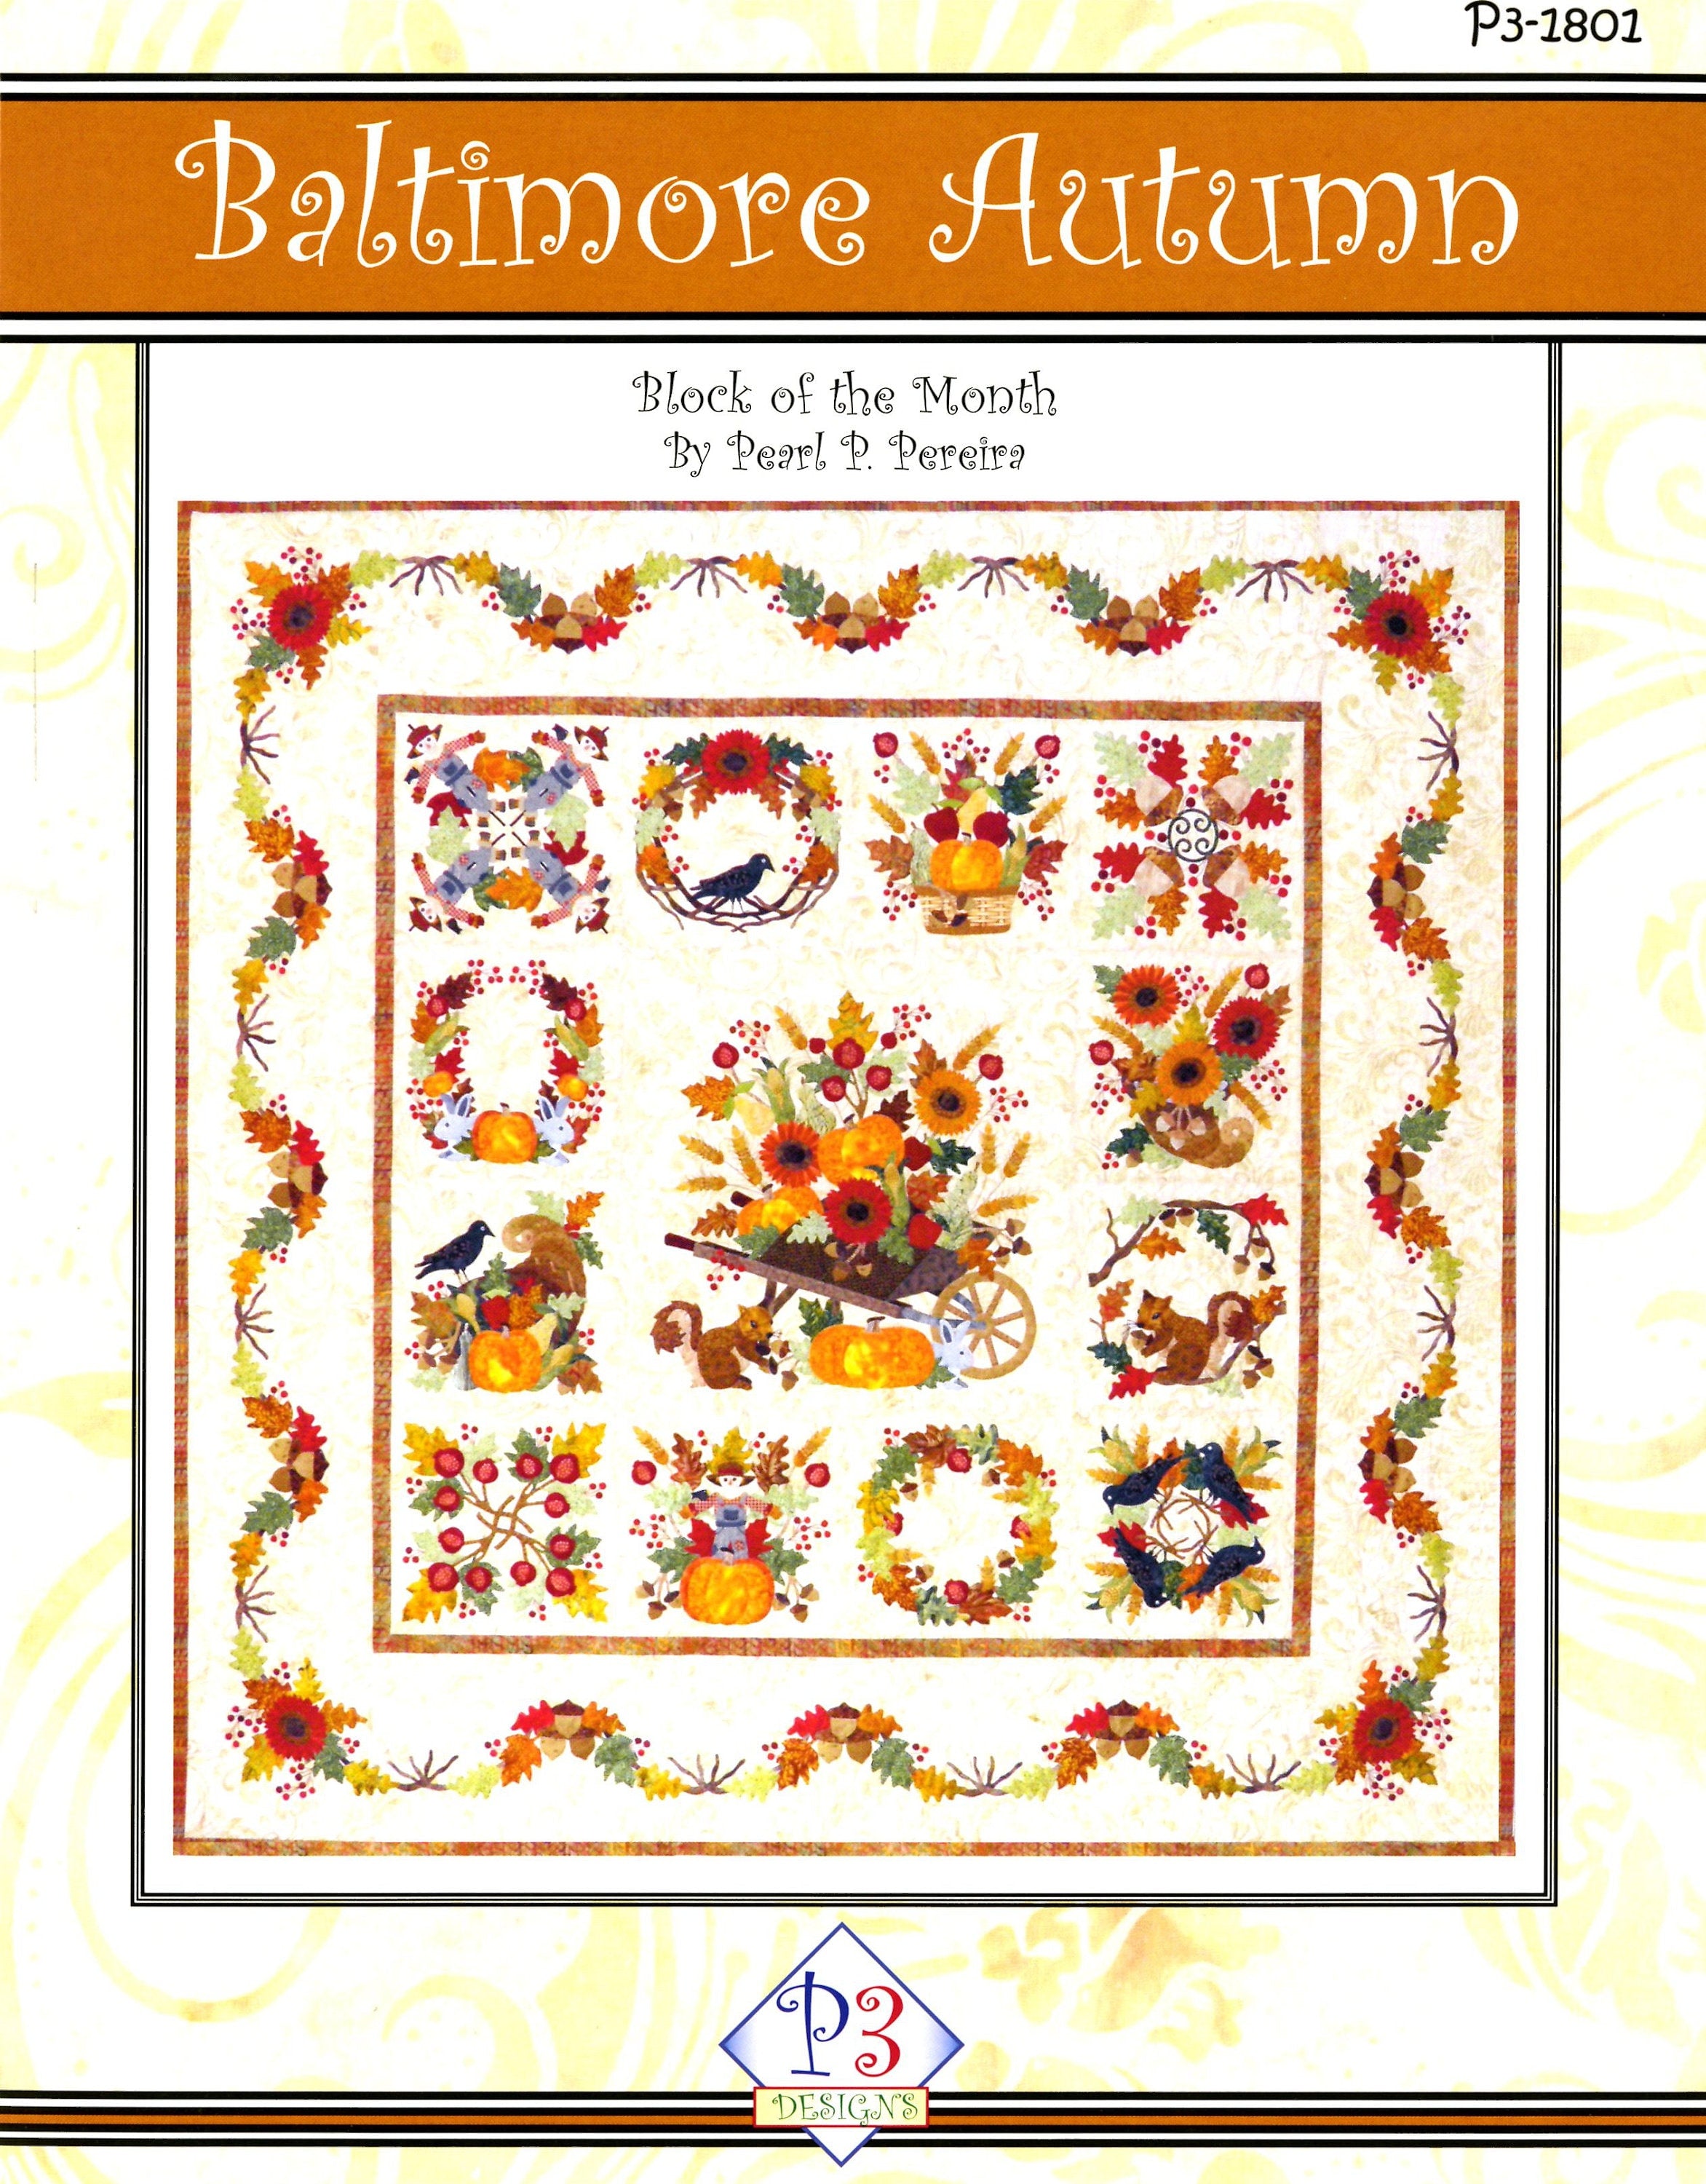 Baltimore Autumn Applique Quilt Pattern Set by Pearl P Pereira of P3 Designs